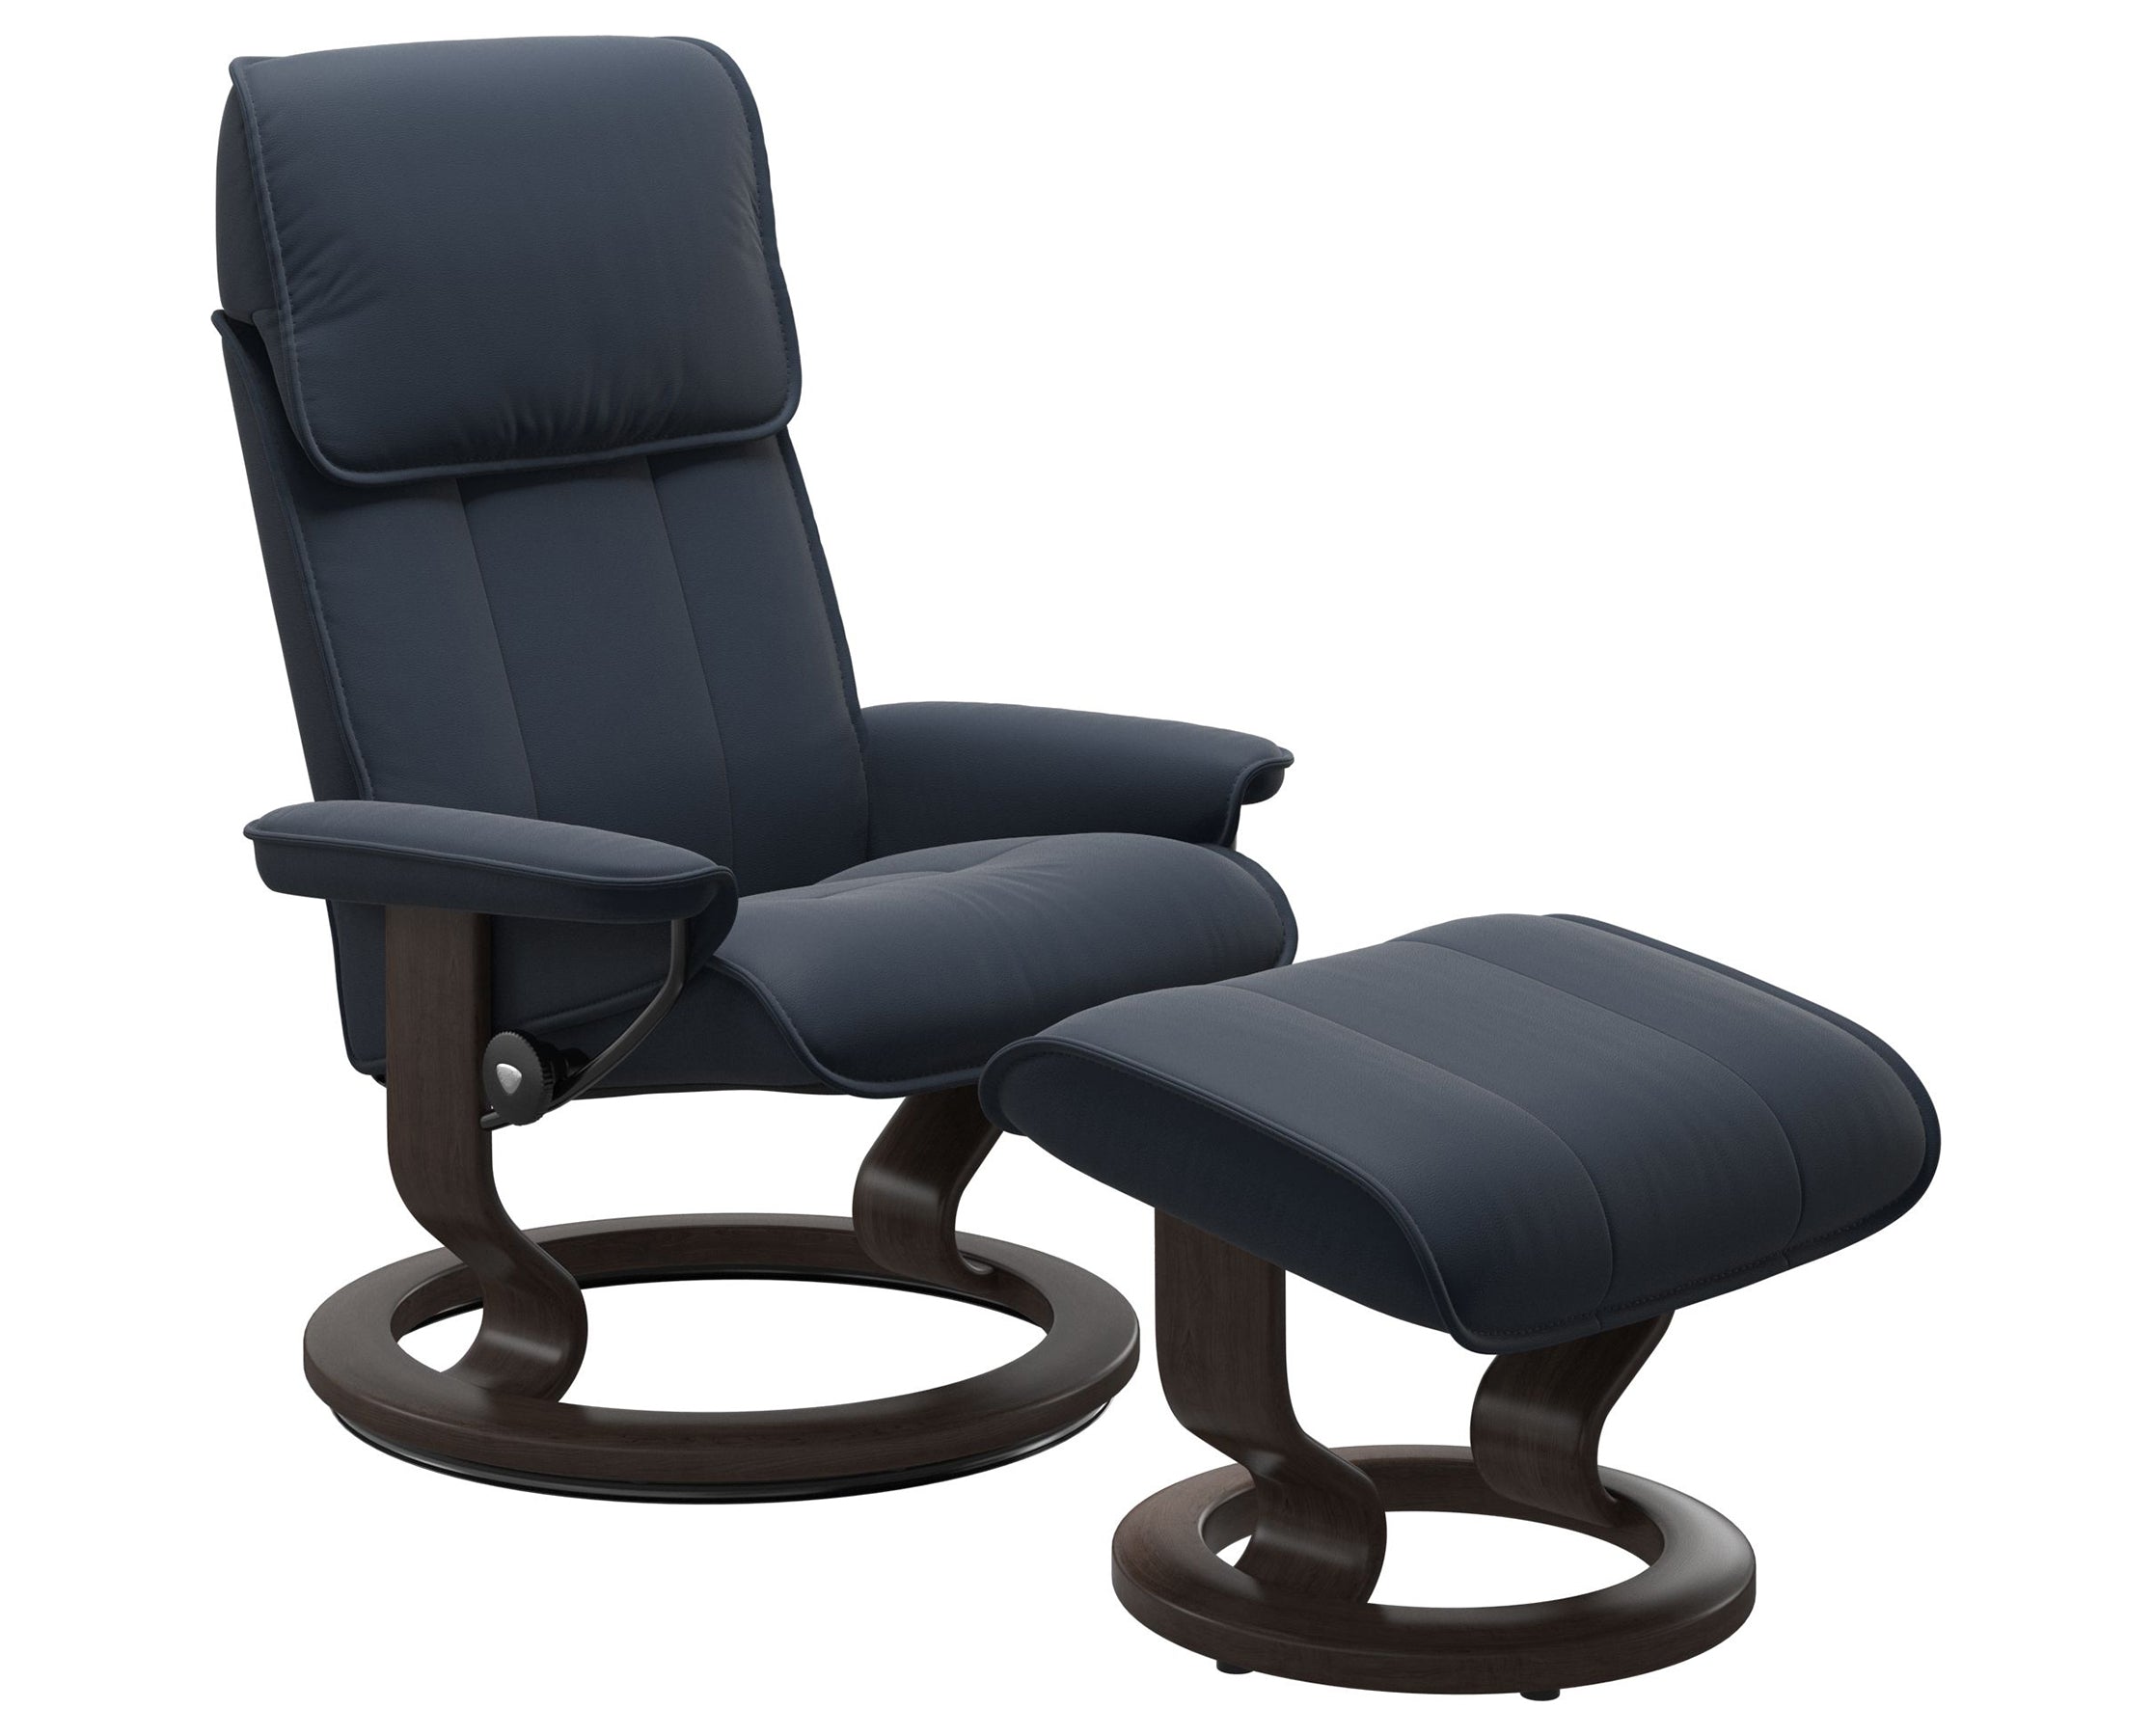 Paloma Leather Oxford Blue M/L and Wenge Base | Stressless Admiral Classic Recliner | Valley Ridge Furniture